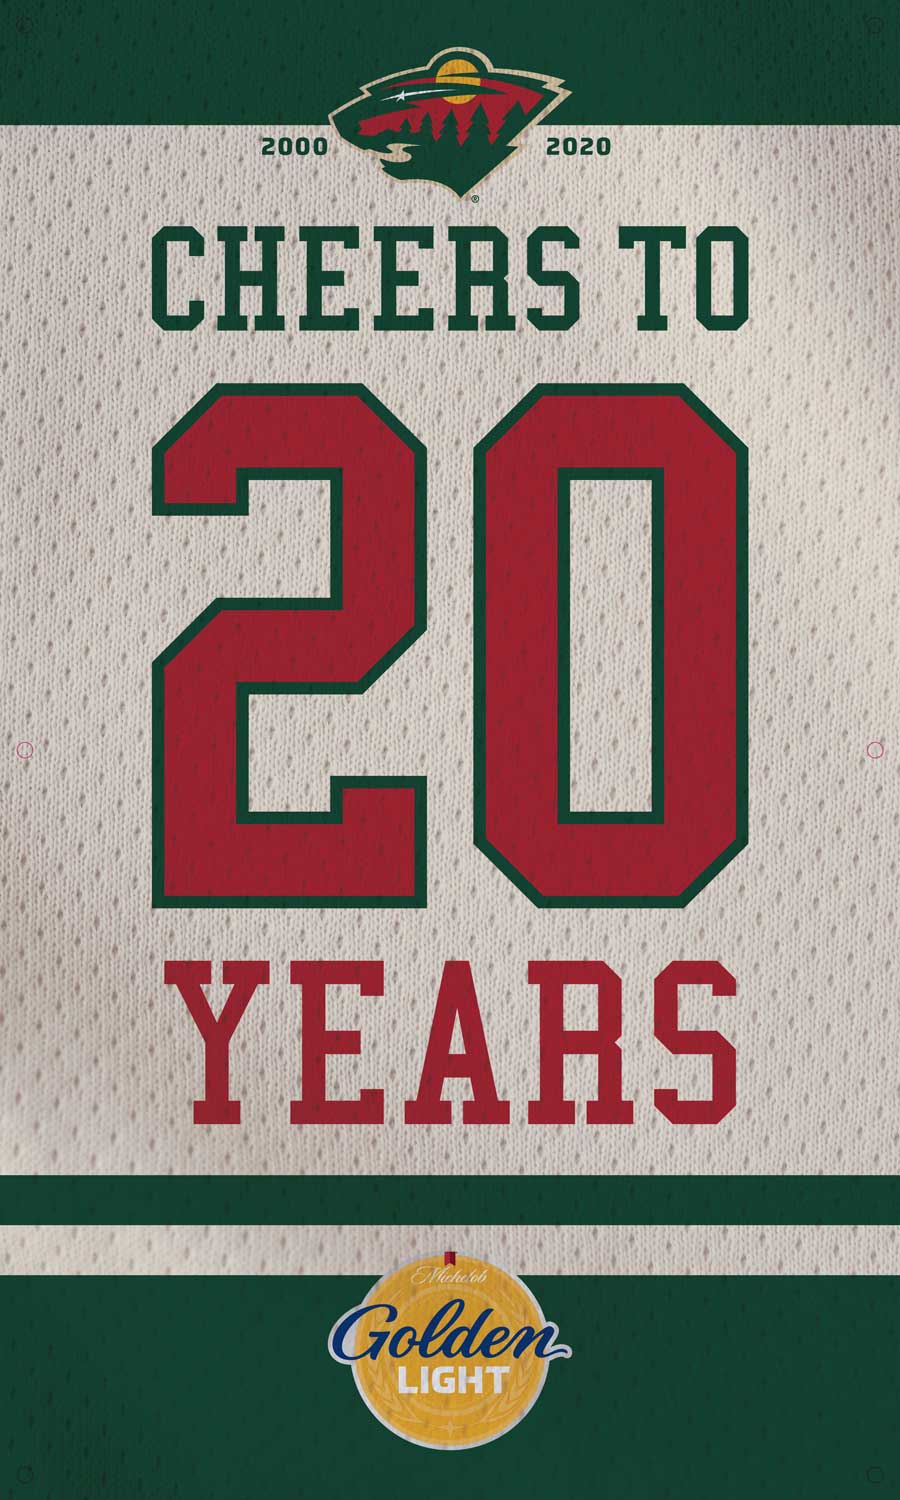 Michelob Golden Light - Minnesota Wild - On ice for two decades